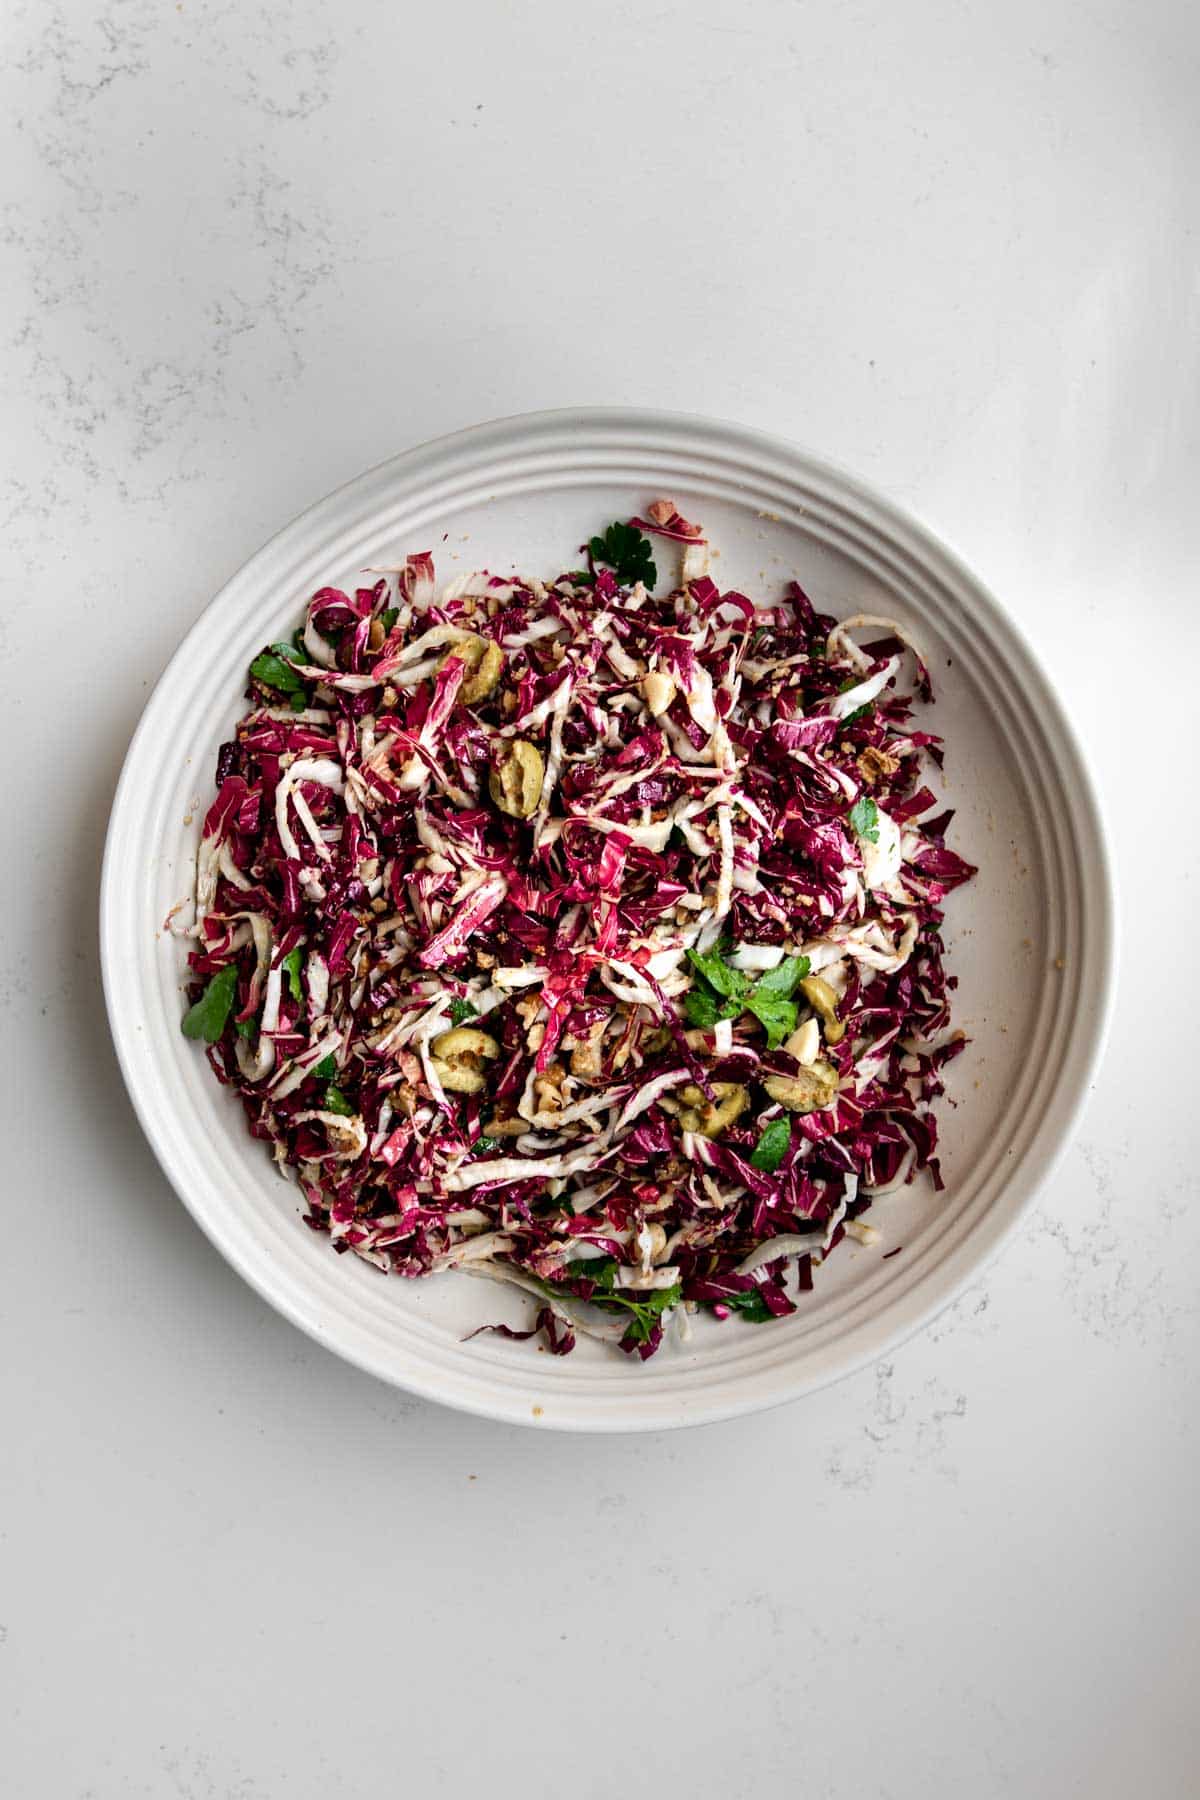 Radicchio Salad in a bowl topped with olives, parsley and walnuts.